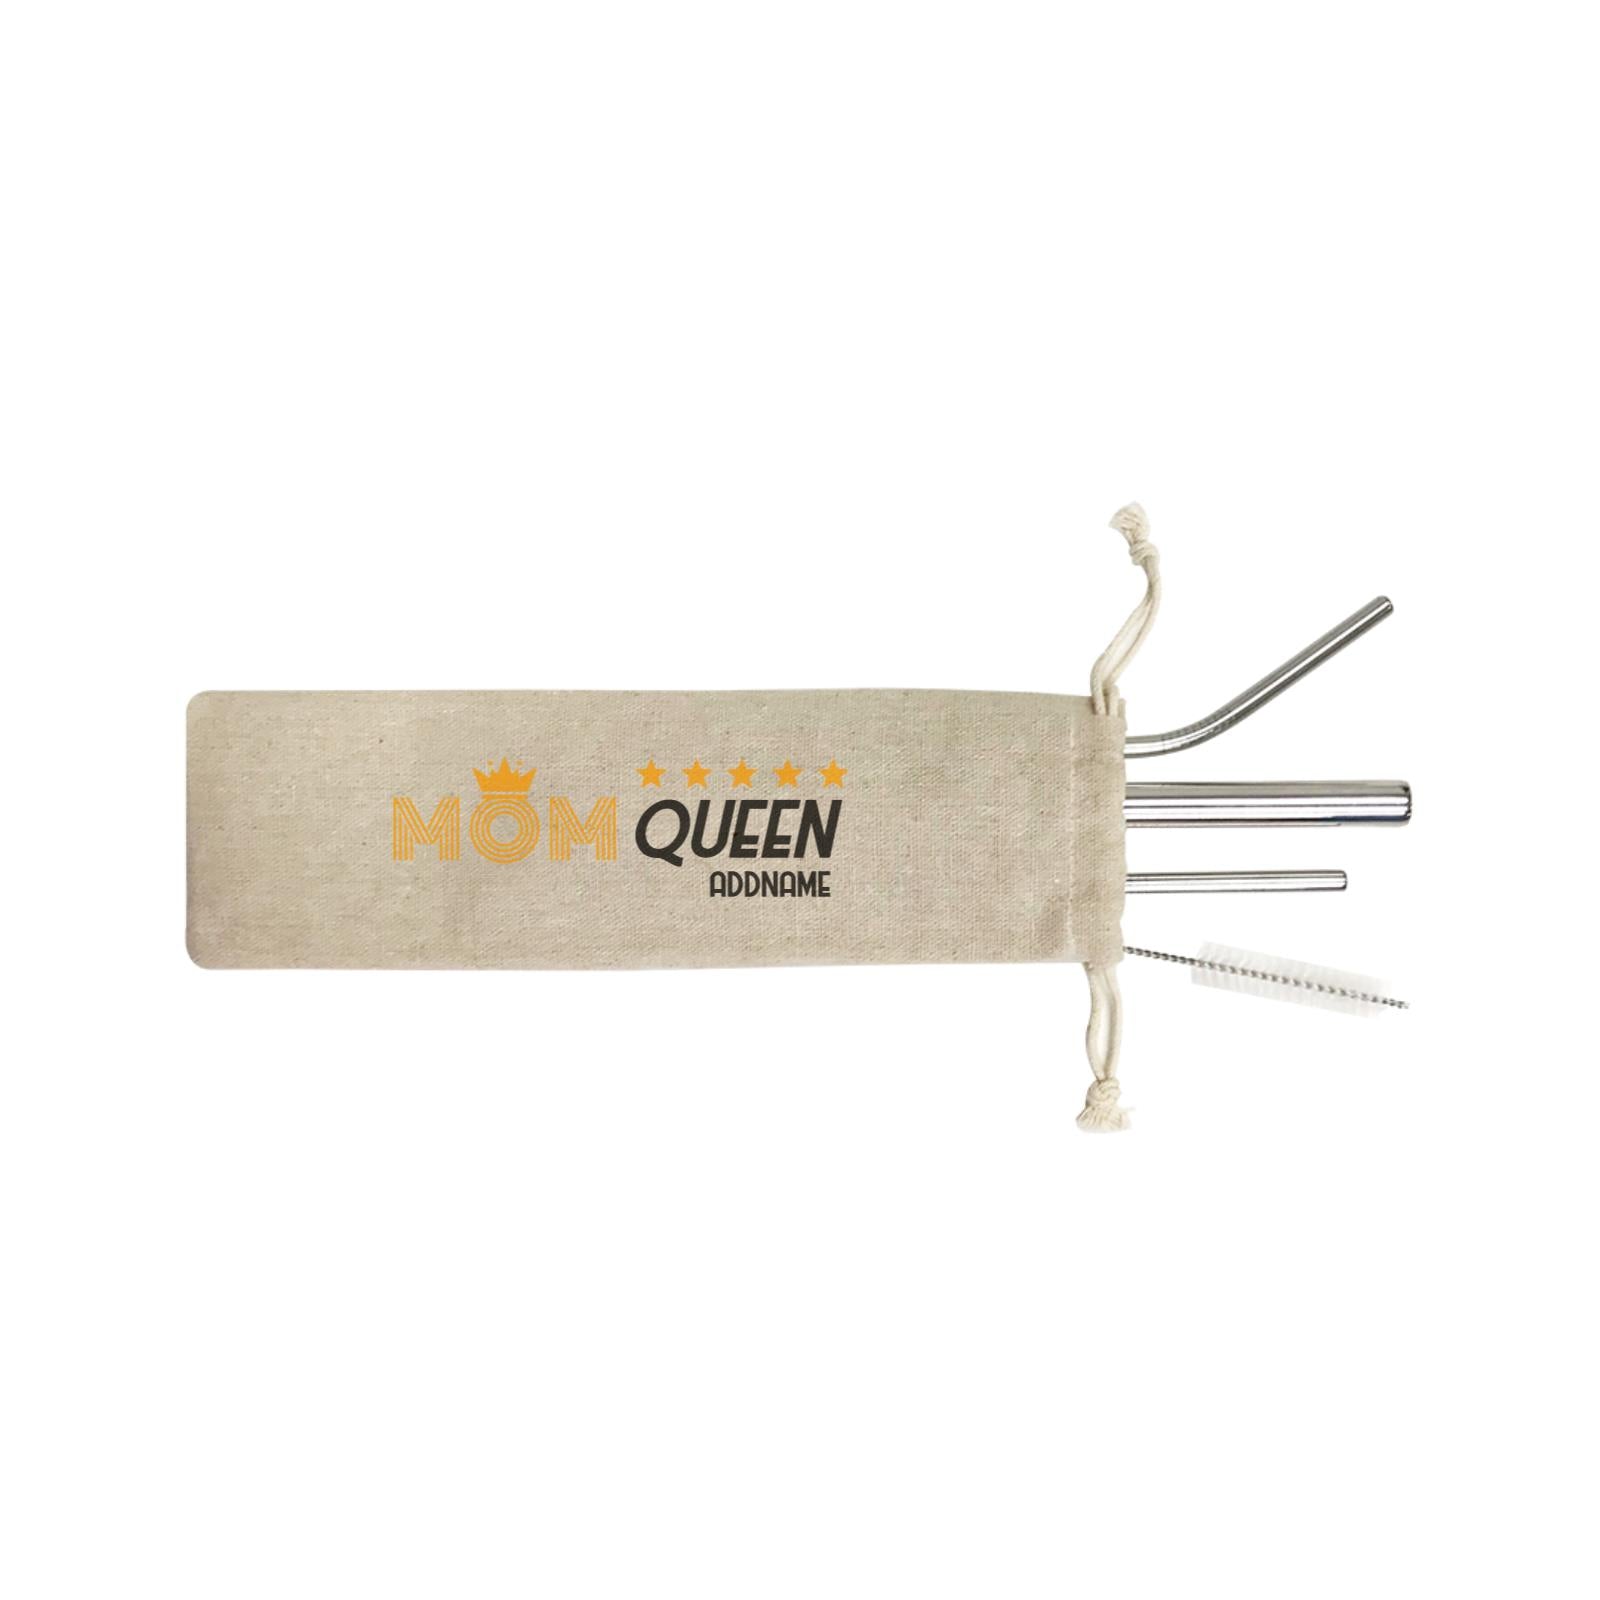 Mom with Tiara Queen Addname SB 4-In-1 Stainless Steel Straw Set in Satchel